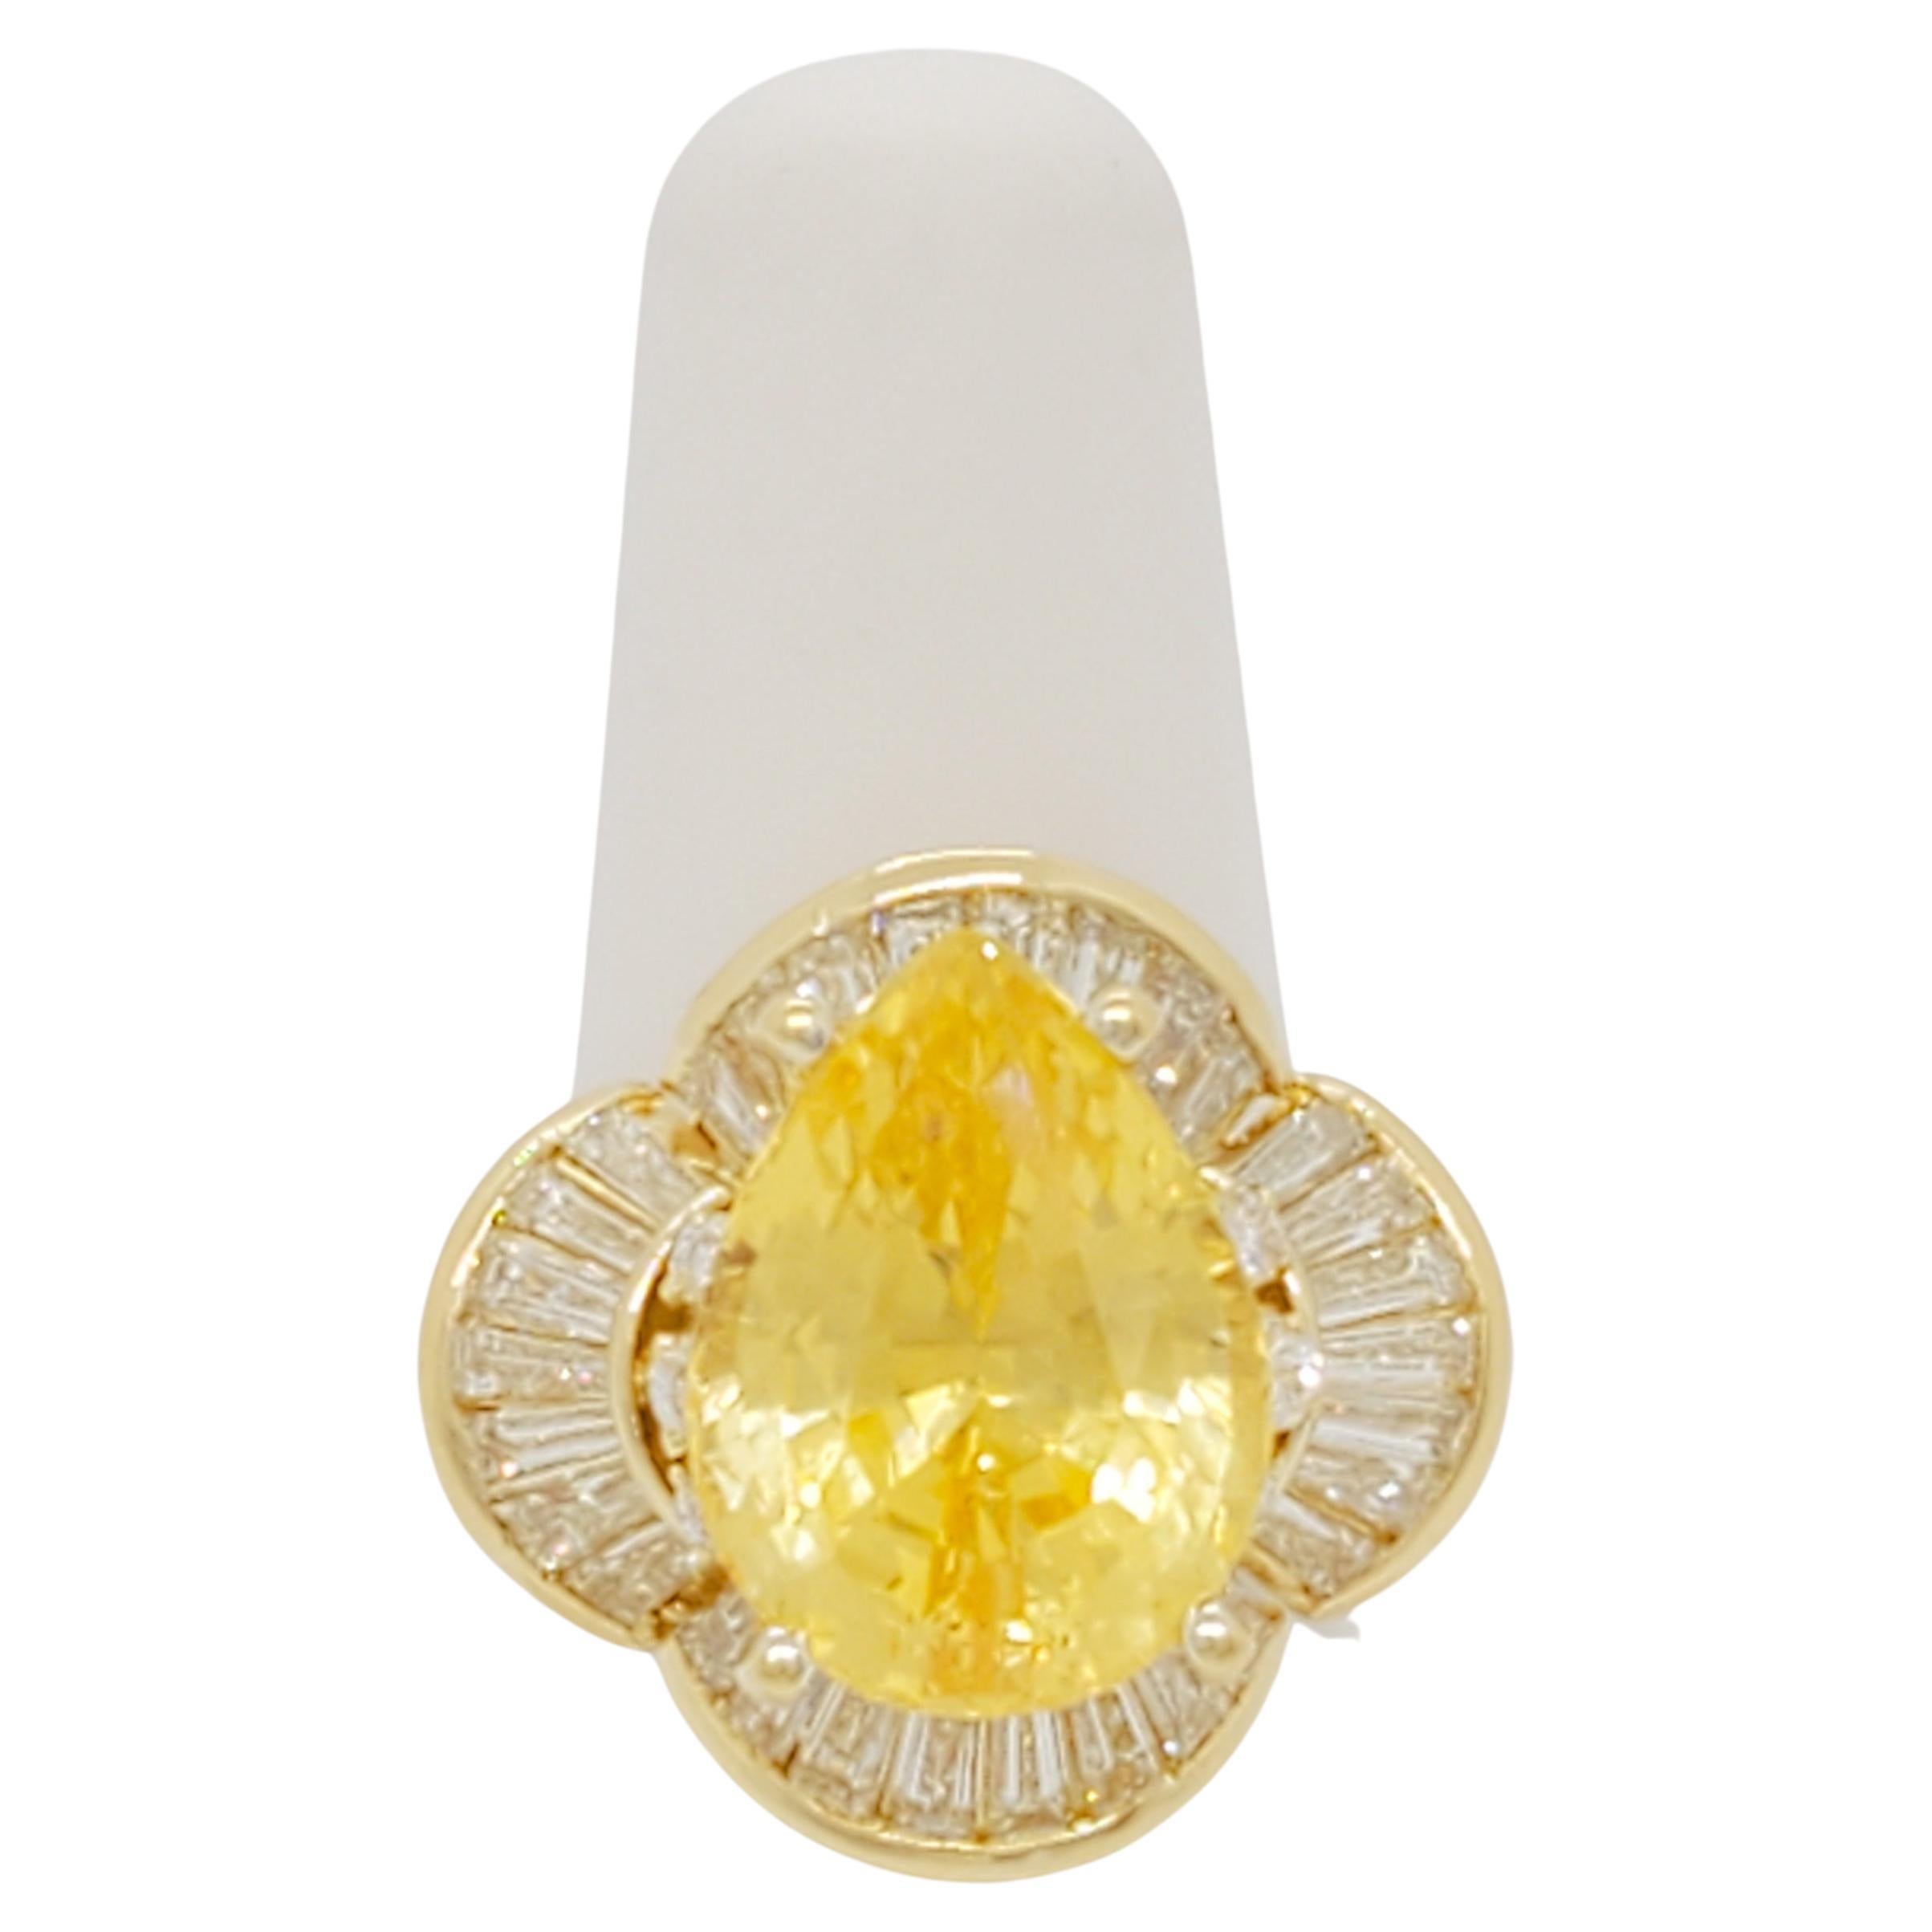 Stunning 9.00 ct. GIA certified unheated Sri Lanka yellow sapphire pear shape with good quality white diamond baguettes and rounds.  Handmade in 18k yellow gold.  Ring size 5.  GIA certificate included.